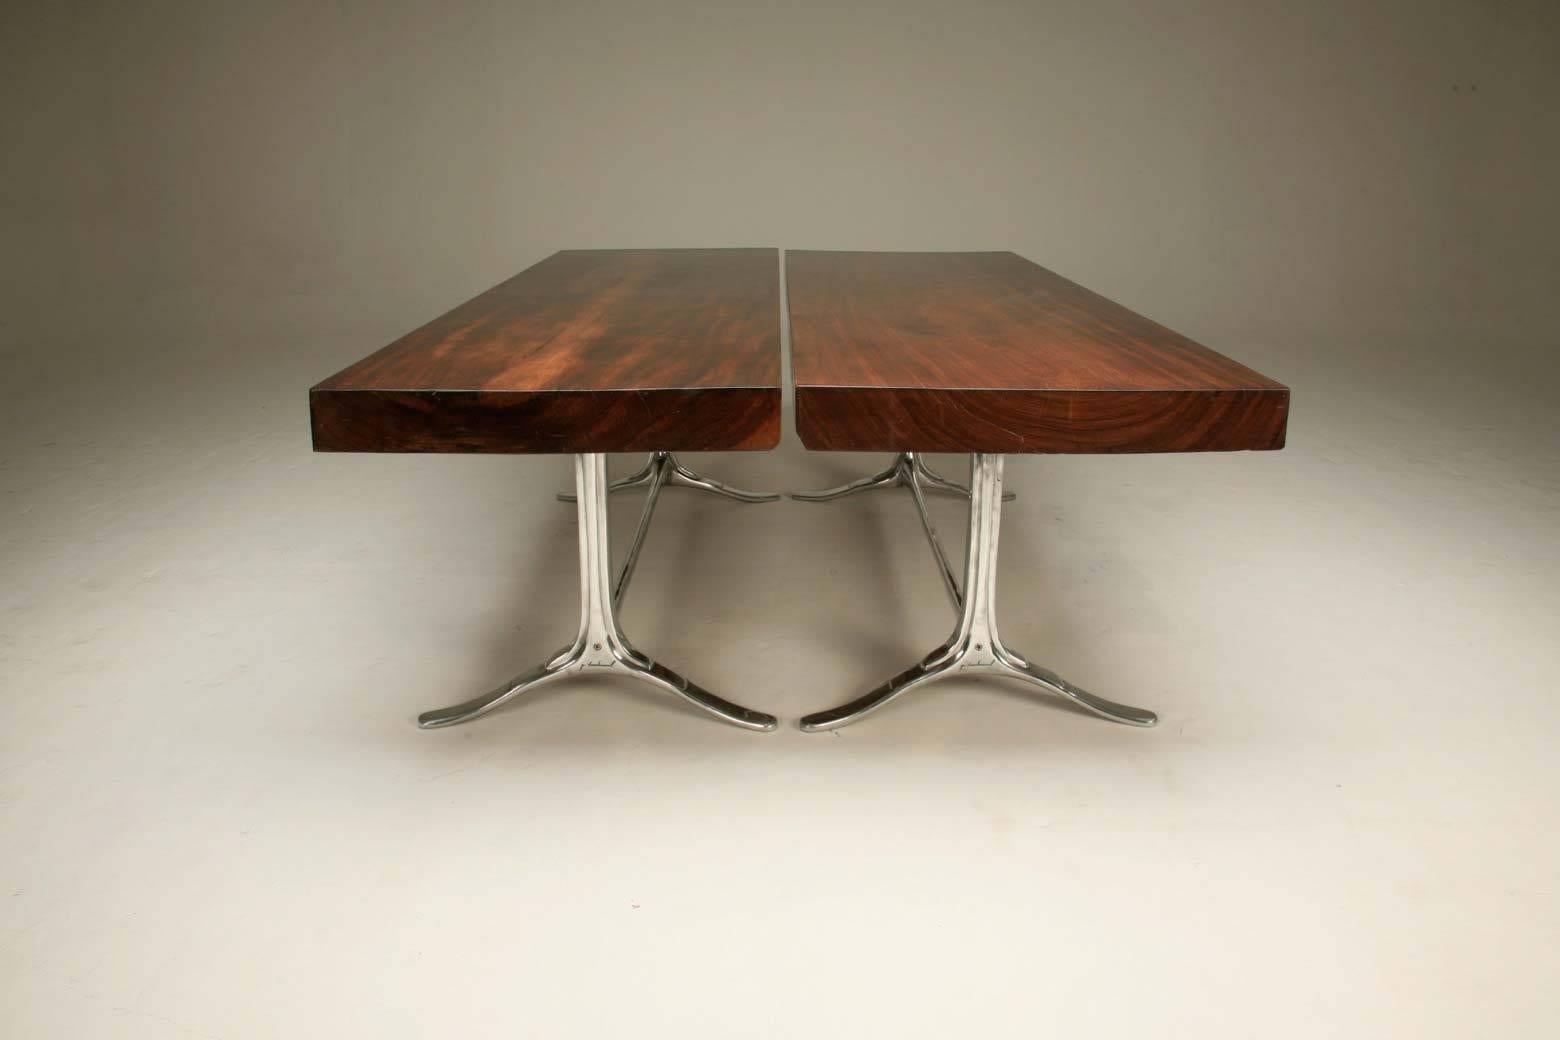 Contemporary Pair of Tables, Antique Hardwood on Sand-Cast Aluminum Base, by P. Tendercool For Sale